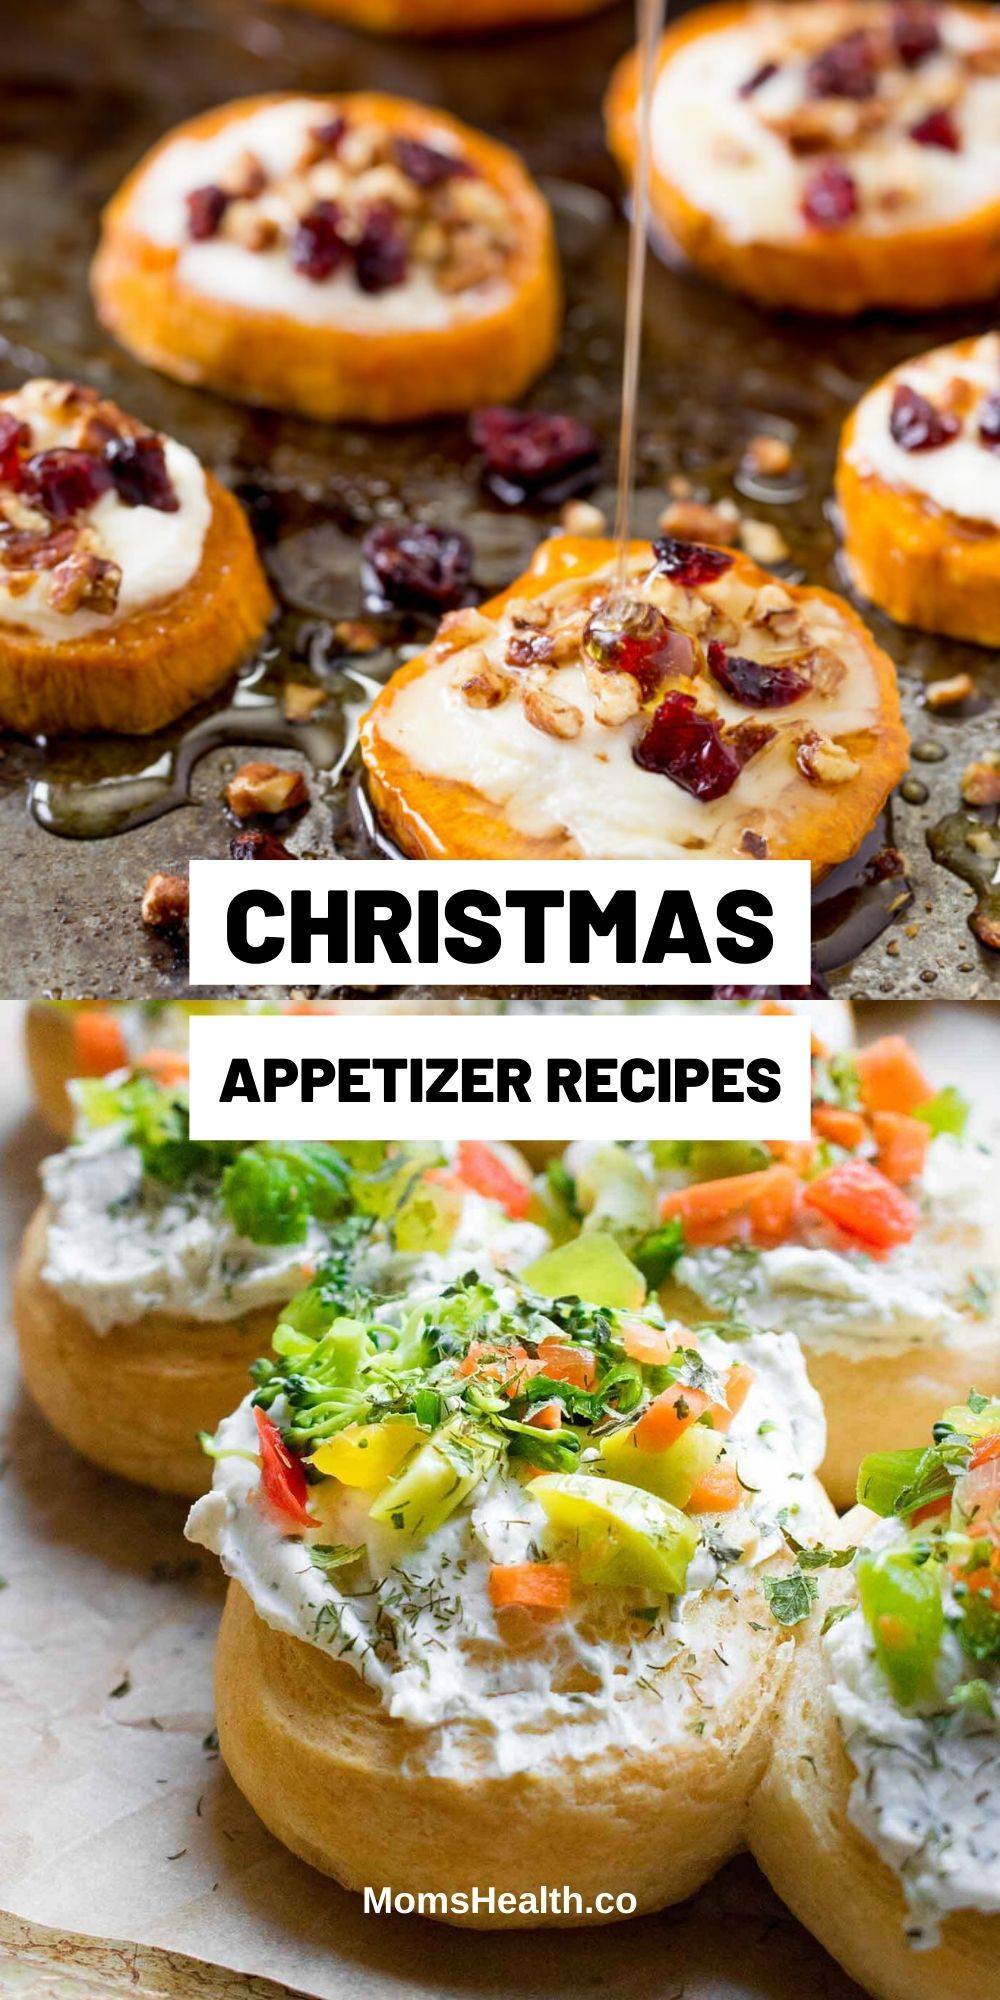 Easy Holiday Appetizer Recipes - Quick Snacks for A Crowd